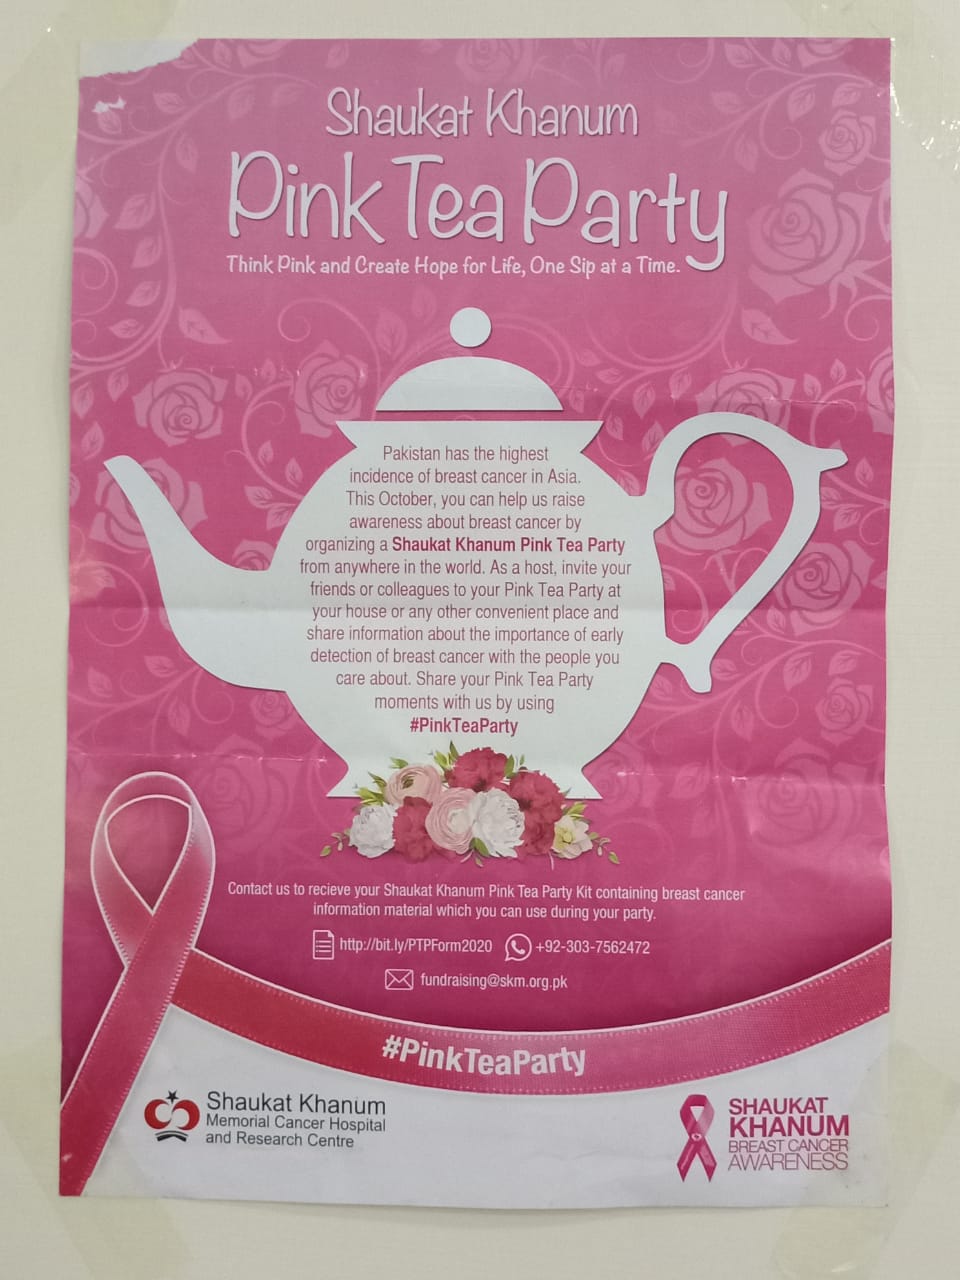 Pink Tea Party Organized by Dr. Aqsa Siddiq at Quaid-e-Azam College of Commerce